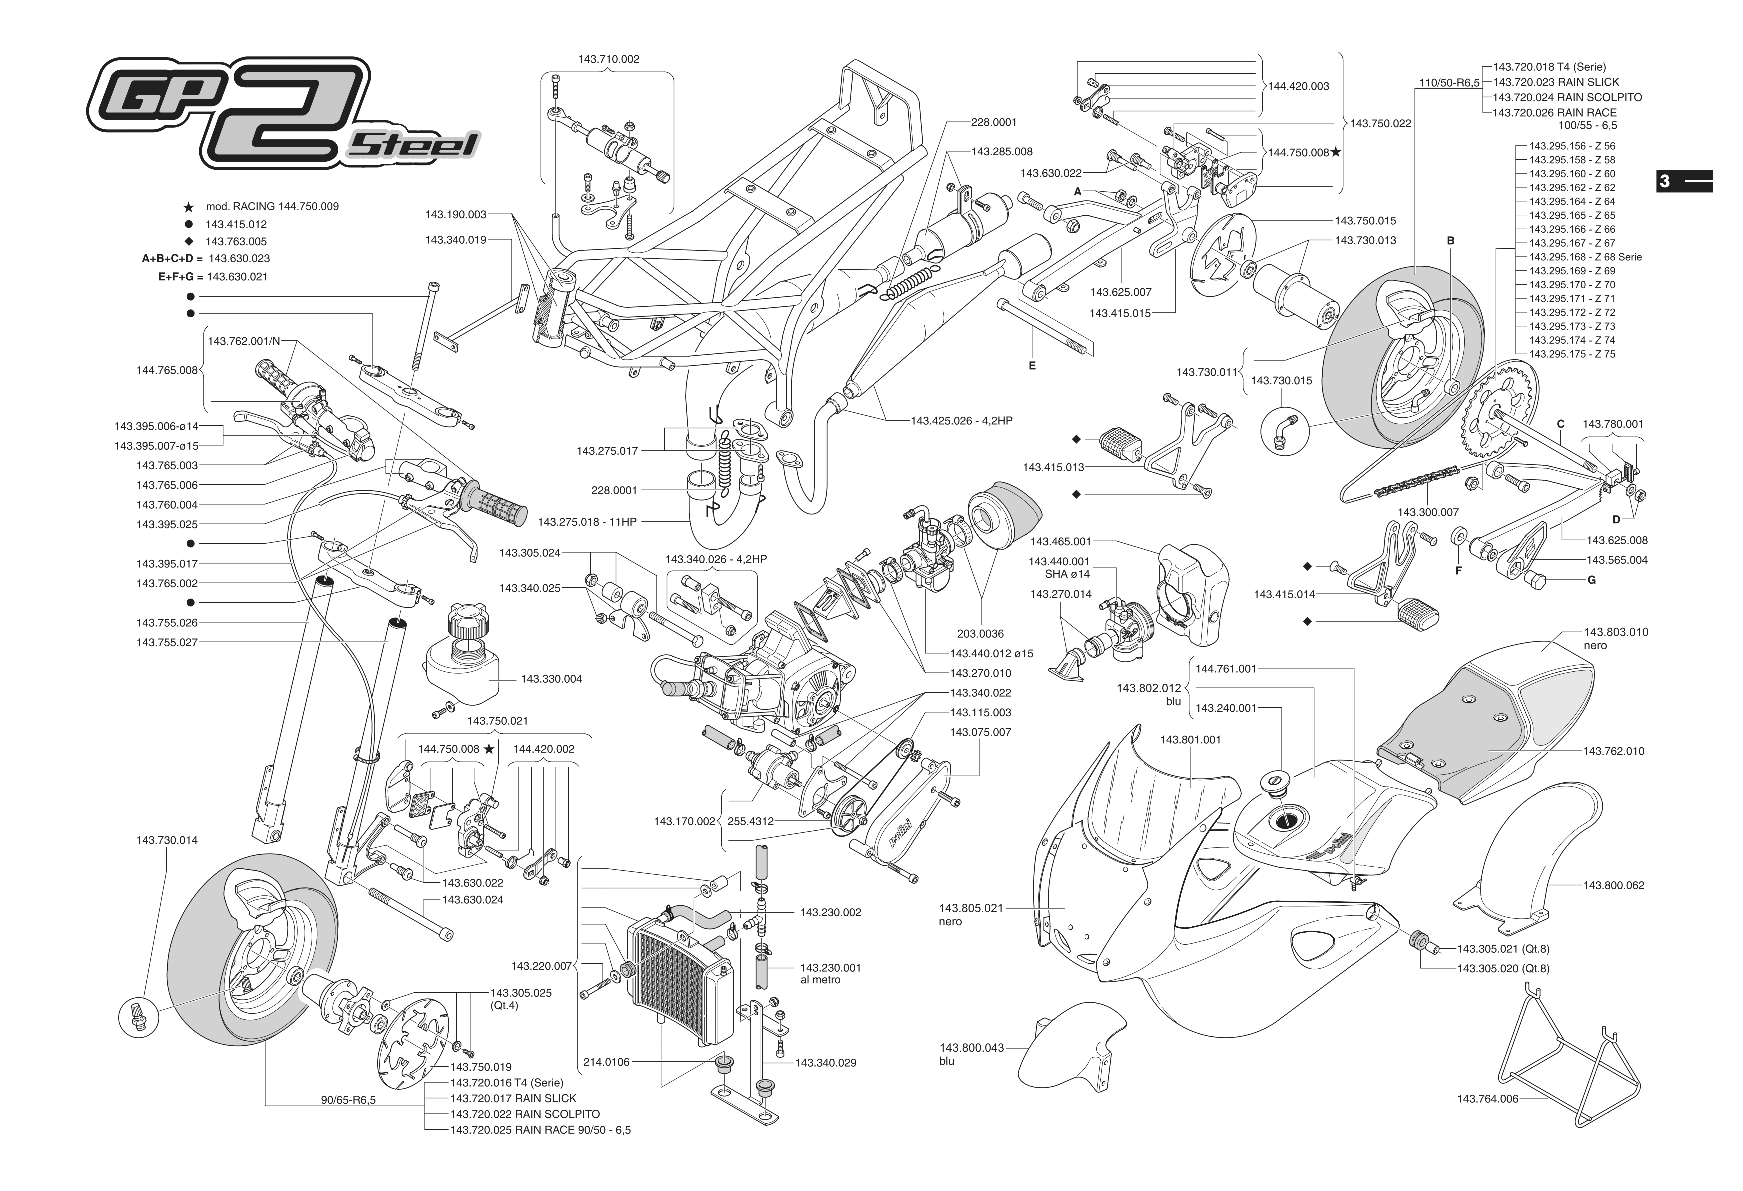 Exploded view Chassis - Engine parts